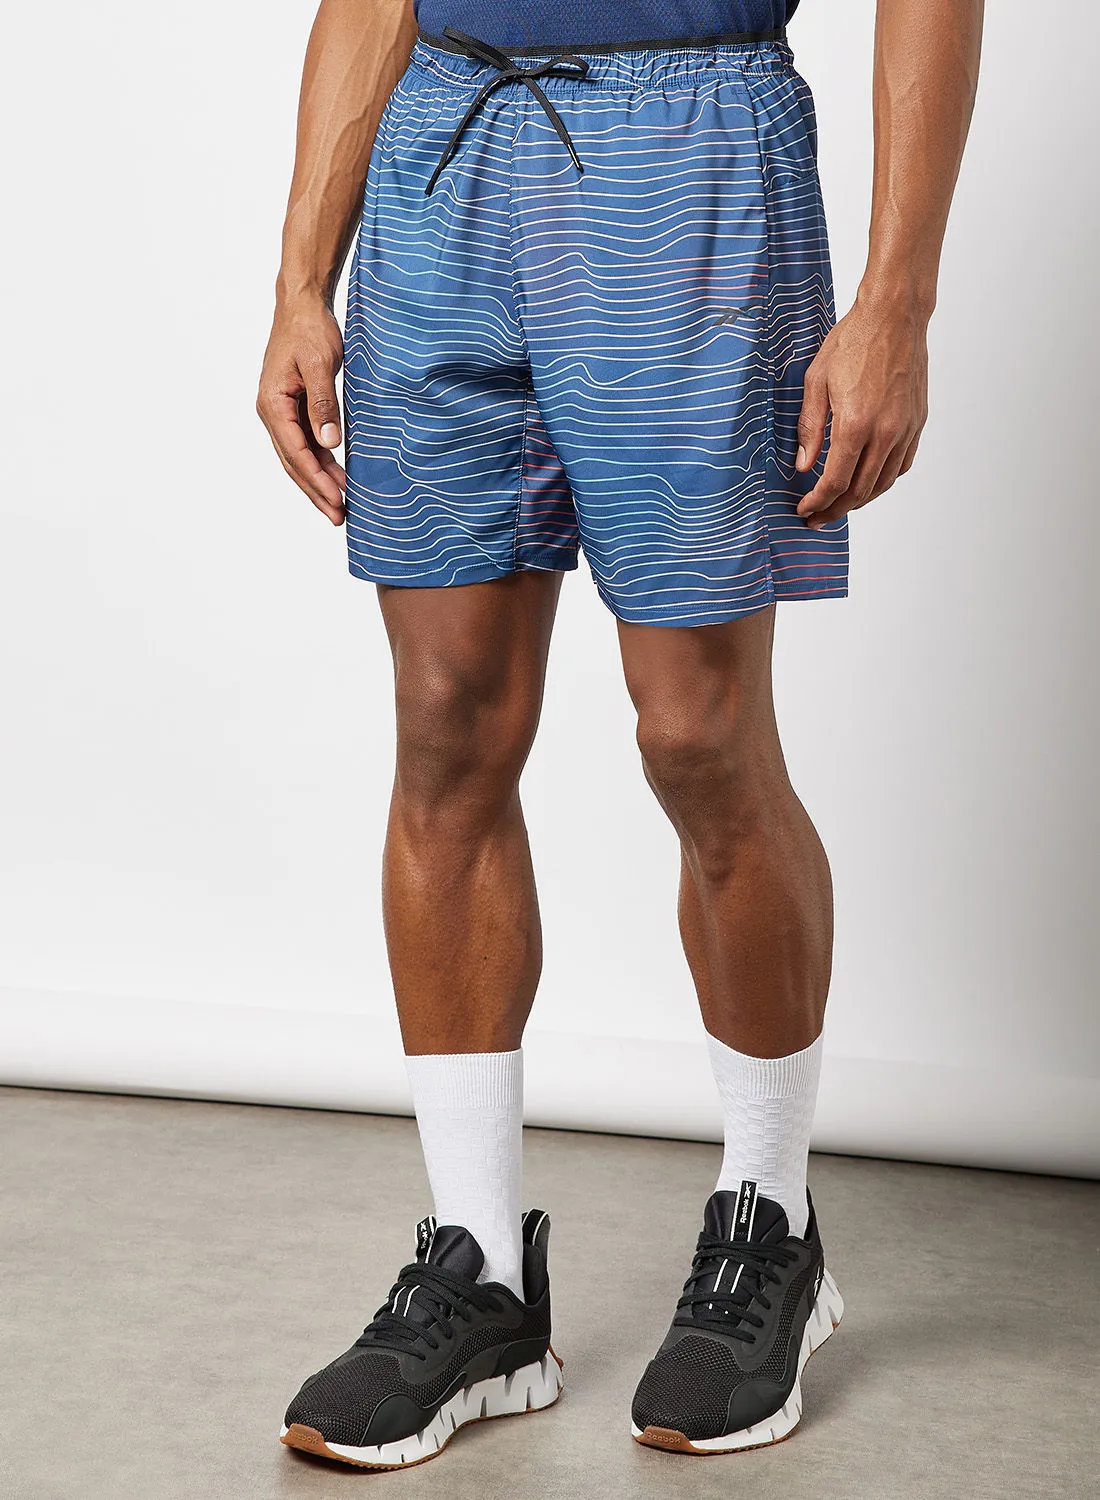 Reebok All-Over Print 2.0 Speed Shorts